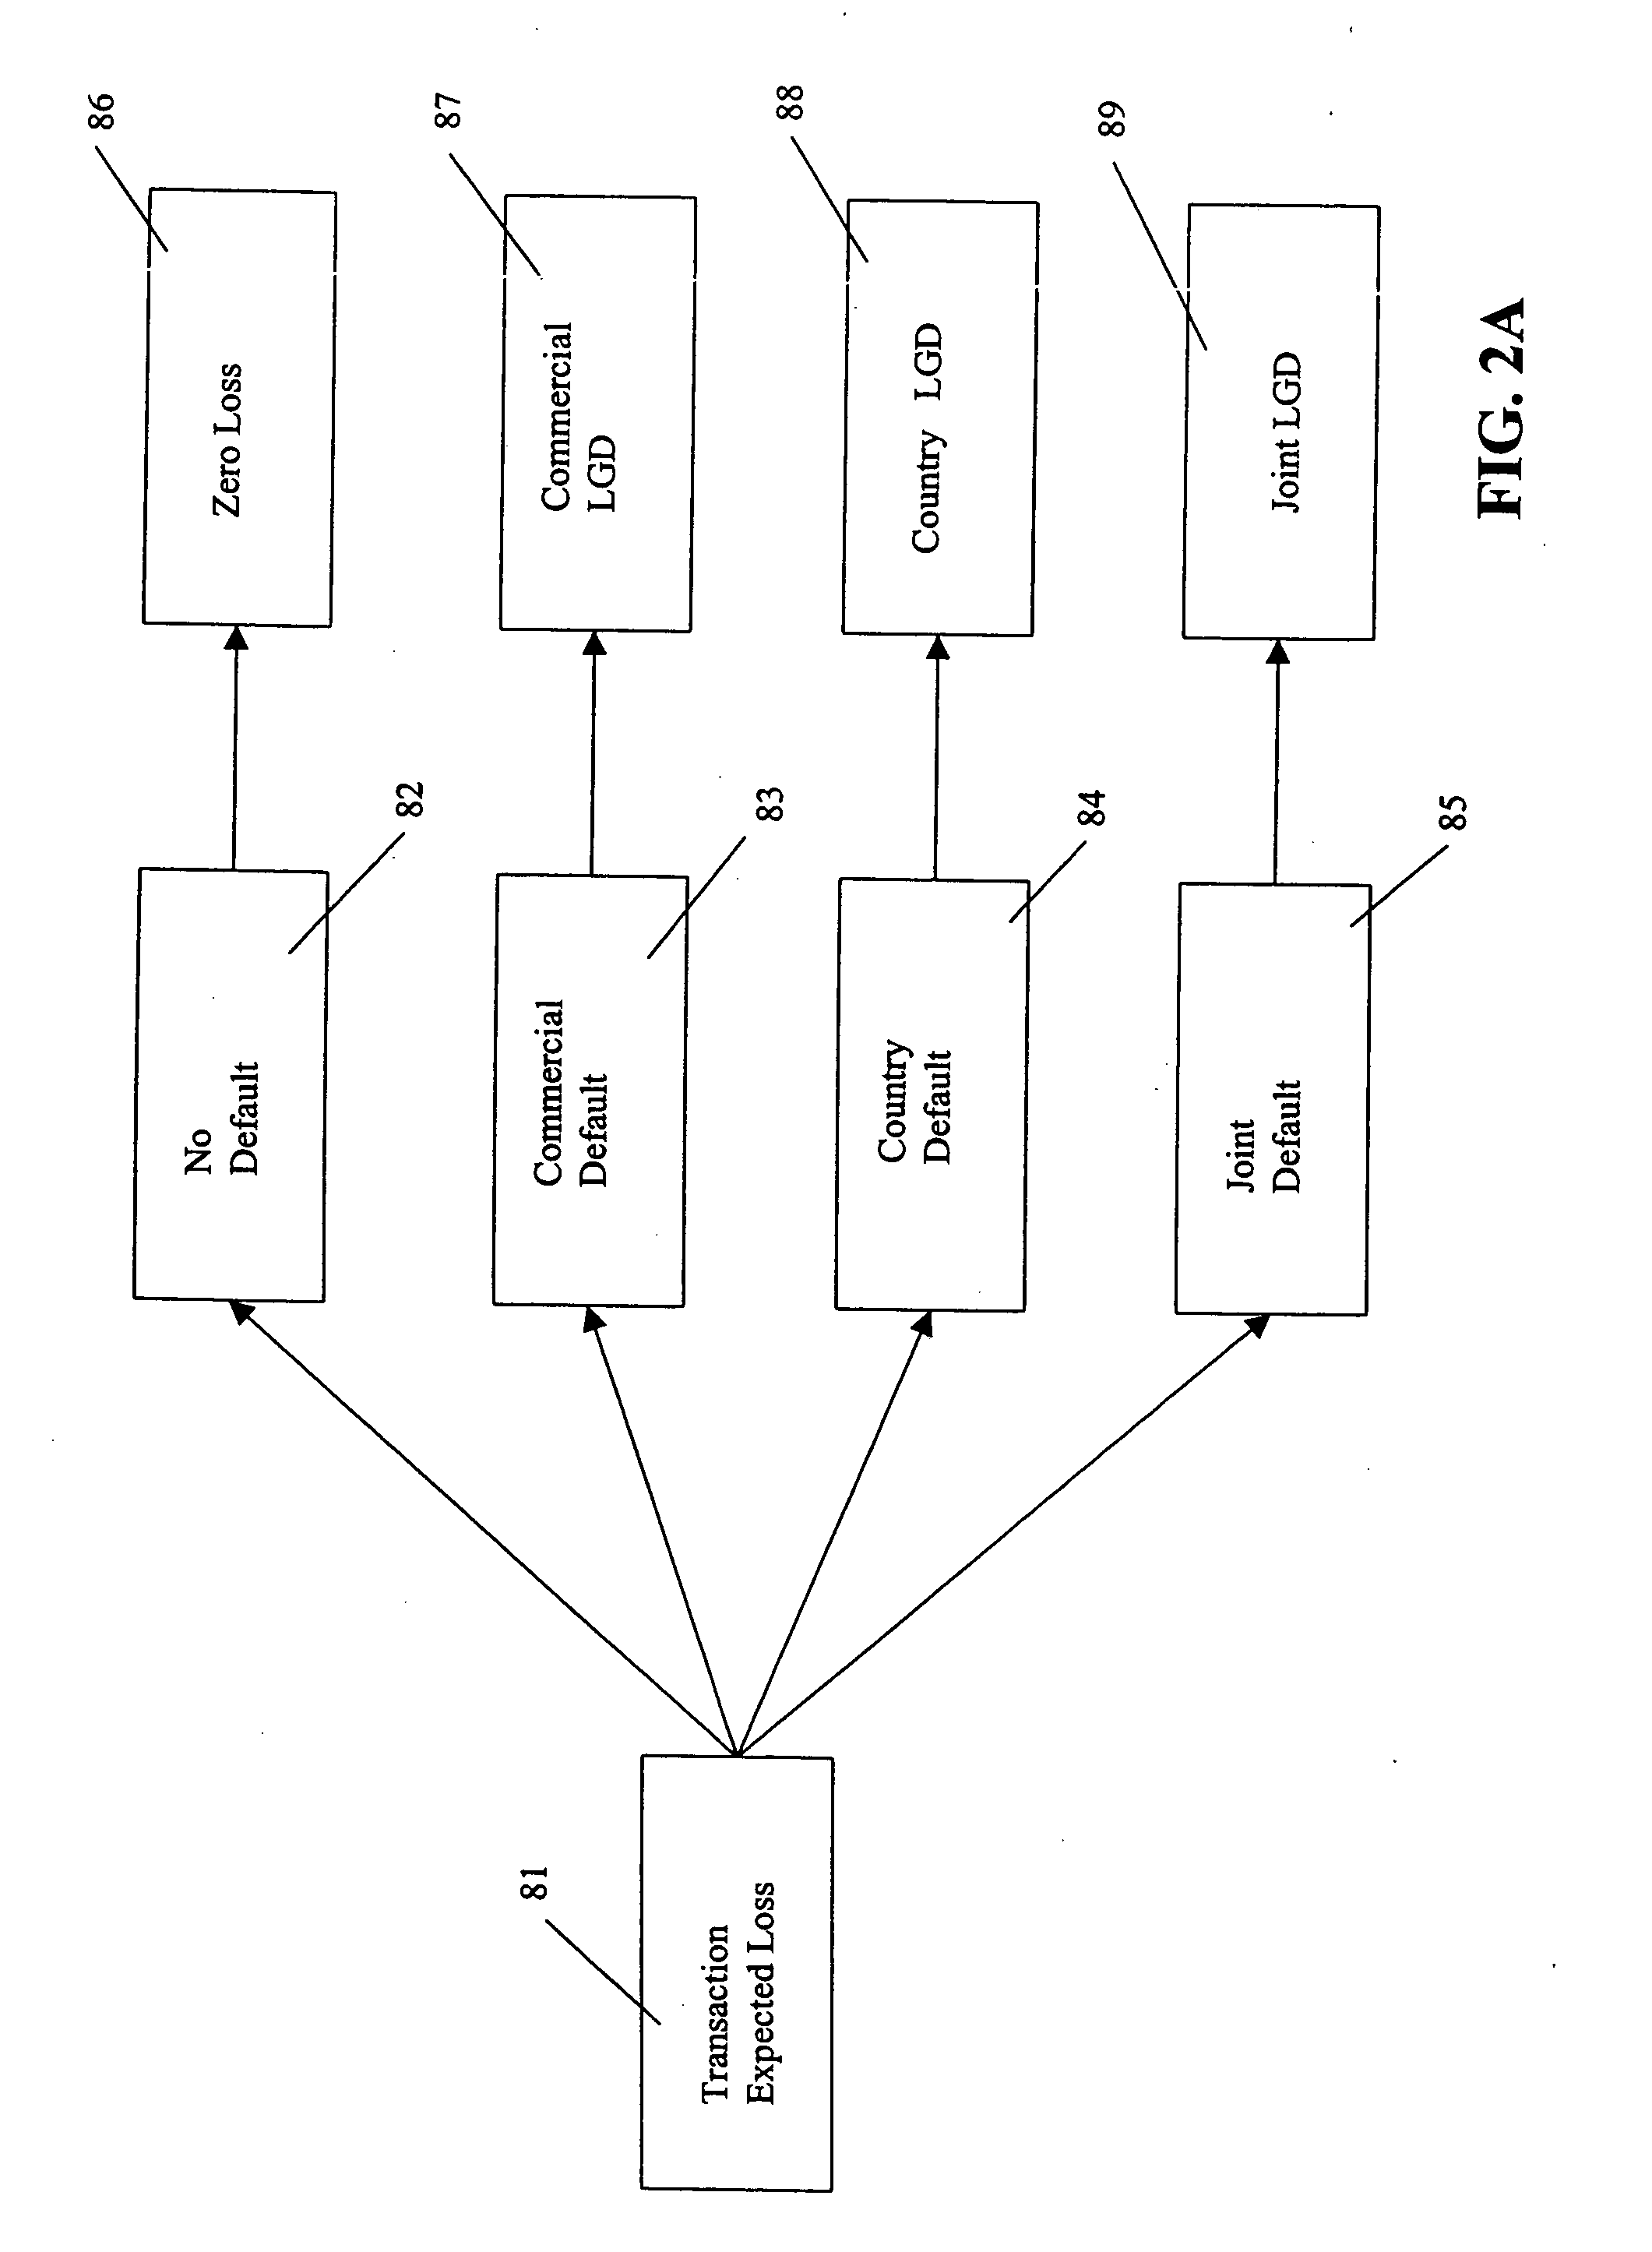 System and method for analyzing risk and profitability of non-recourse loans